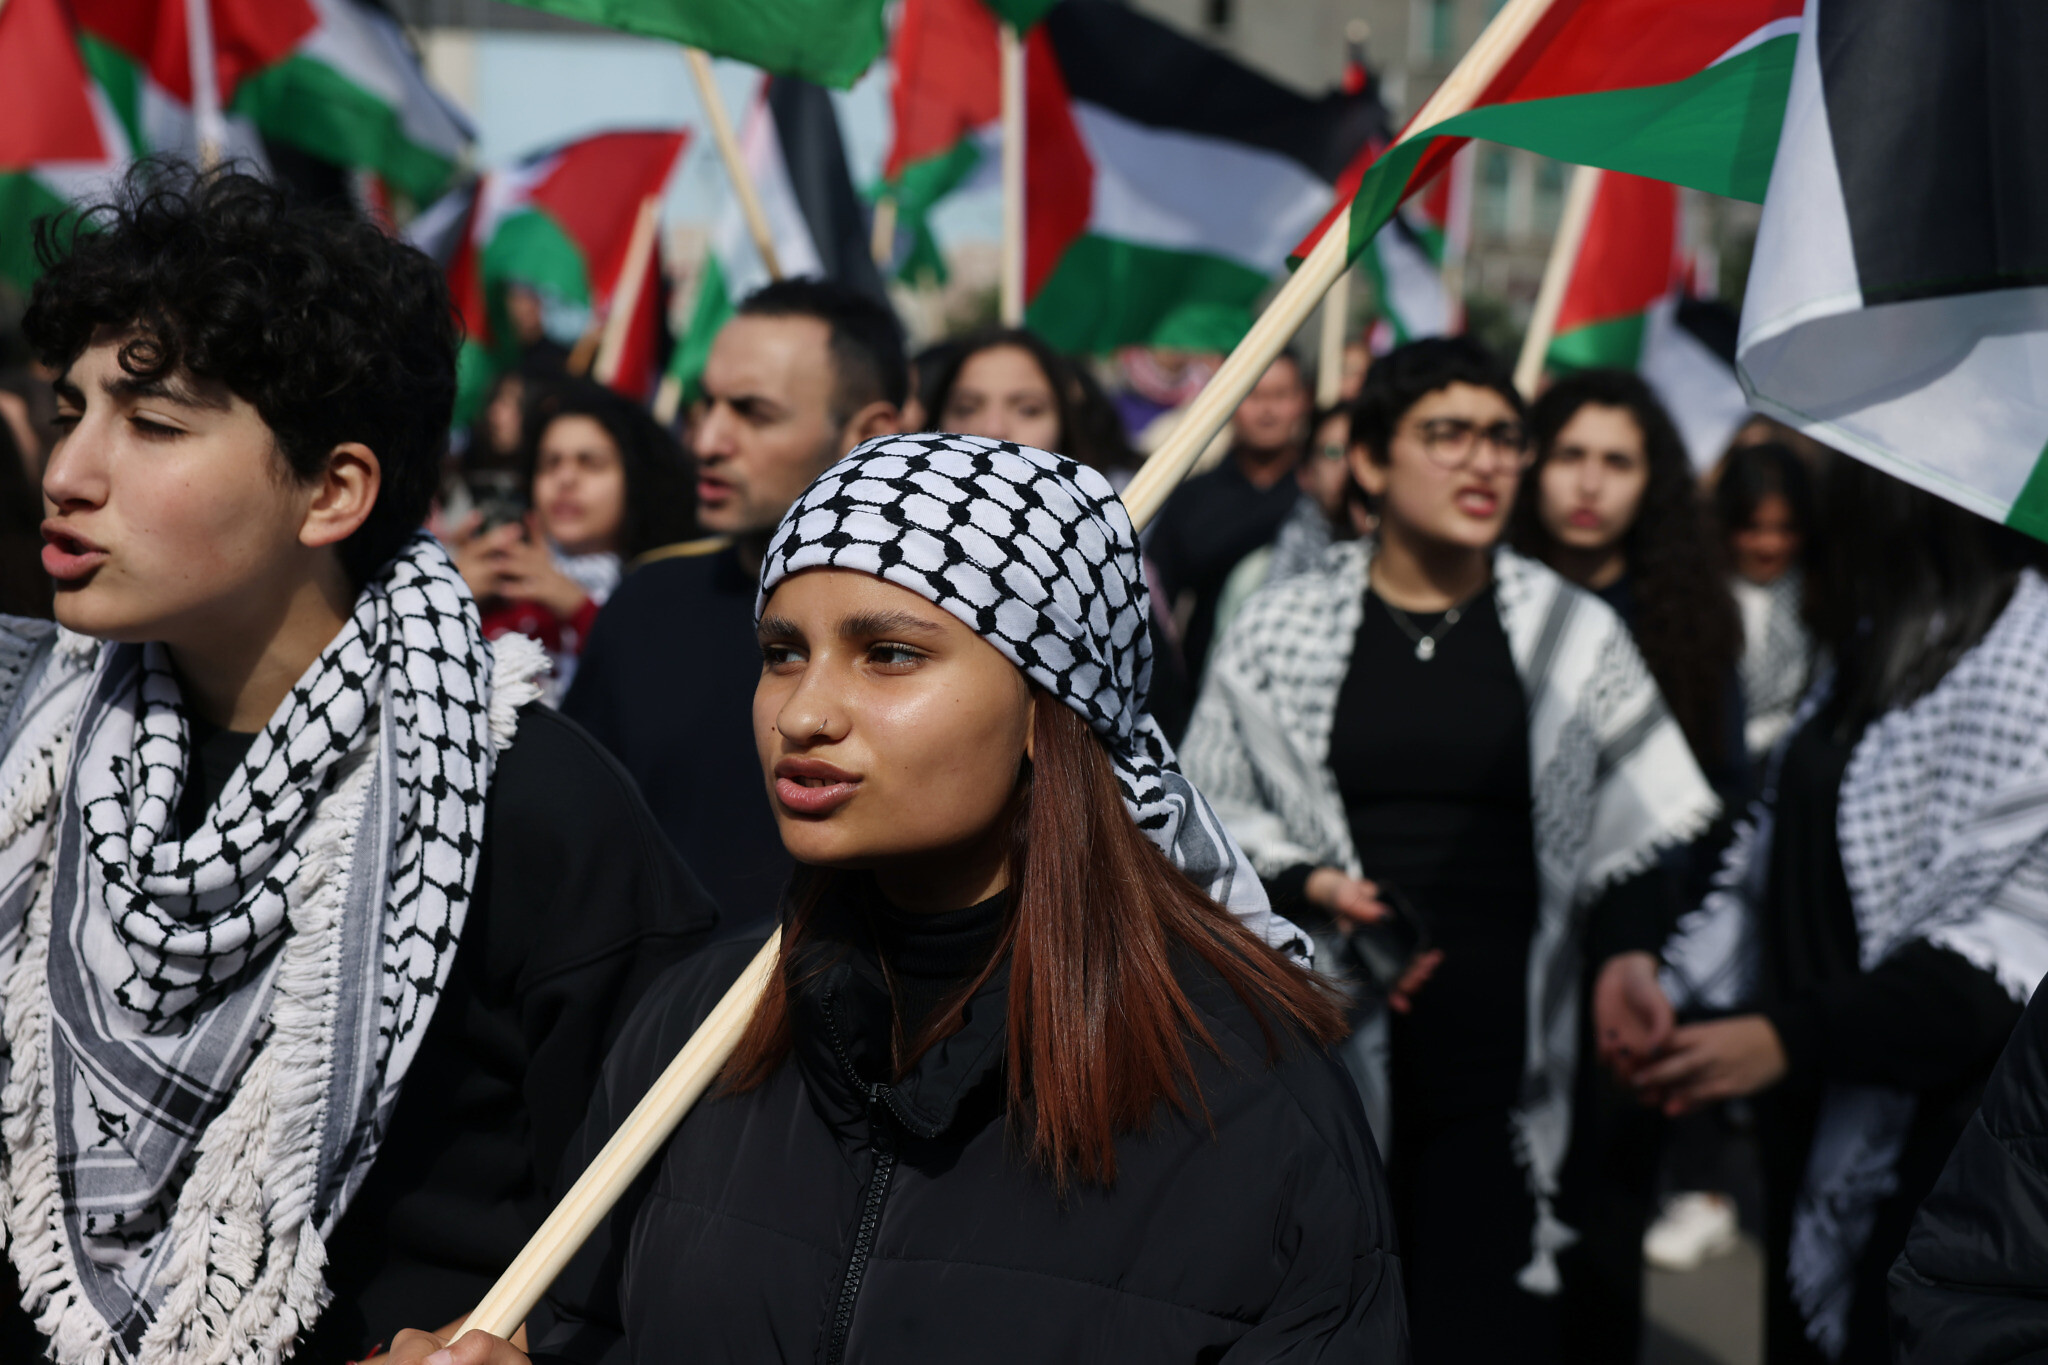 What Does the Palestinian 'Keffiyeh' Symbolize?